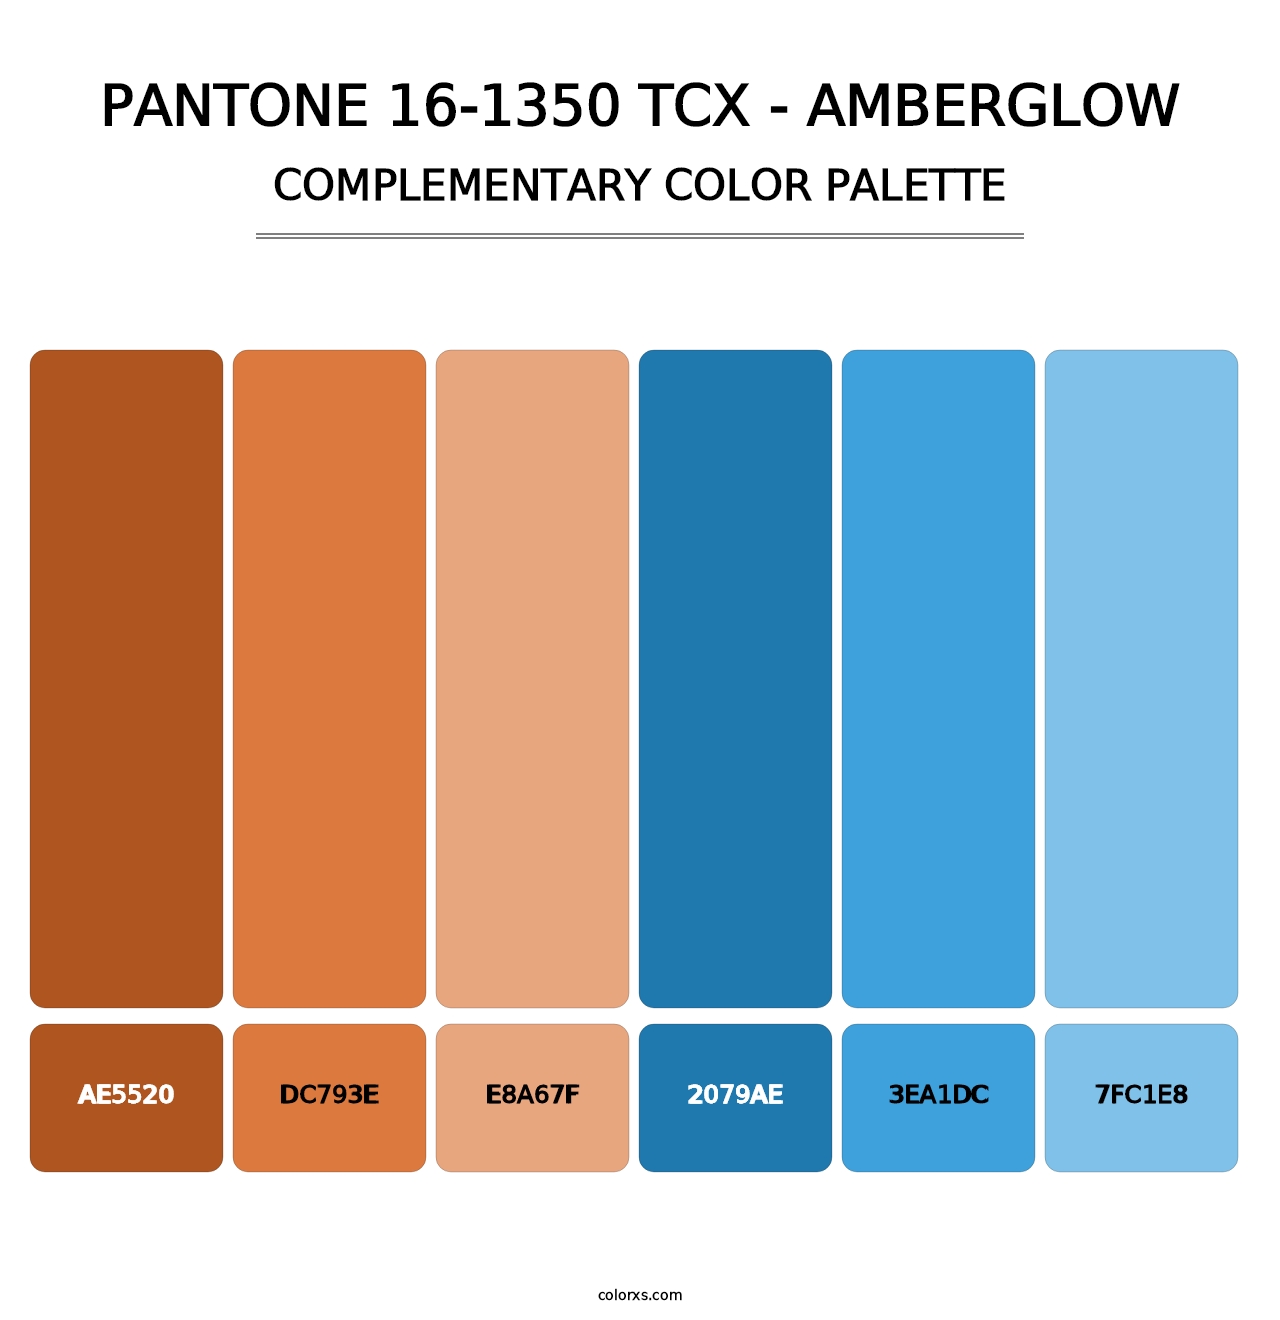 PANTONE 16-1350 TCX - Amberglow - Complementary Color Palette